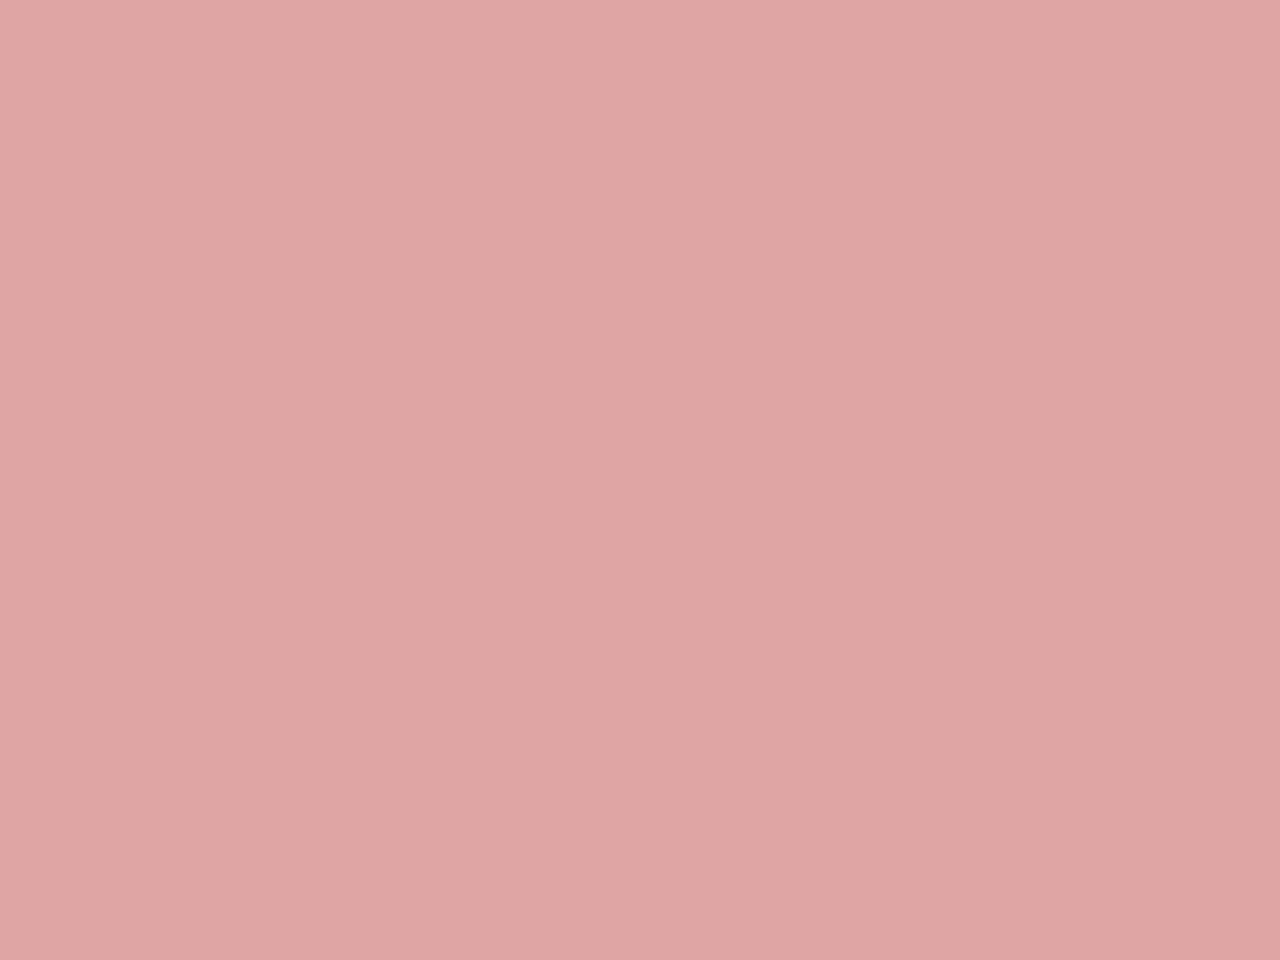 1280x960 Pastel Pink Solid Color Background. 